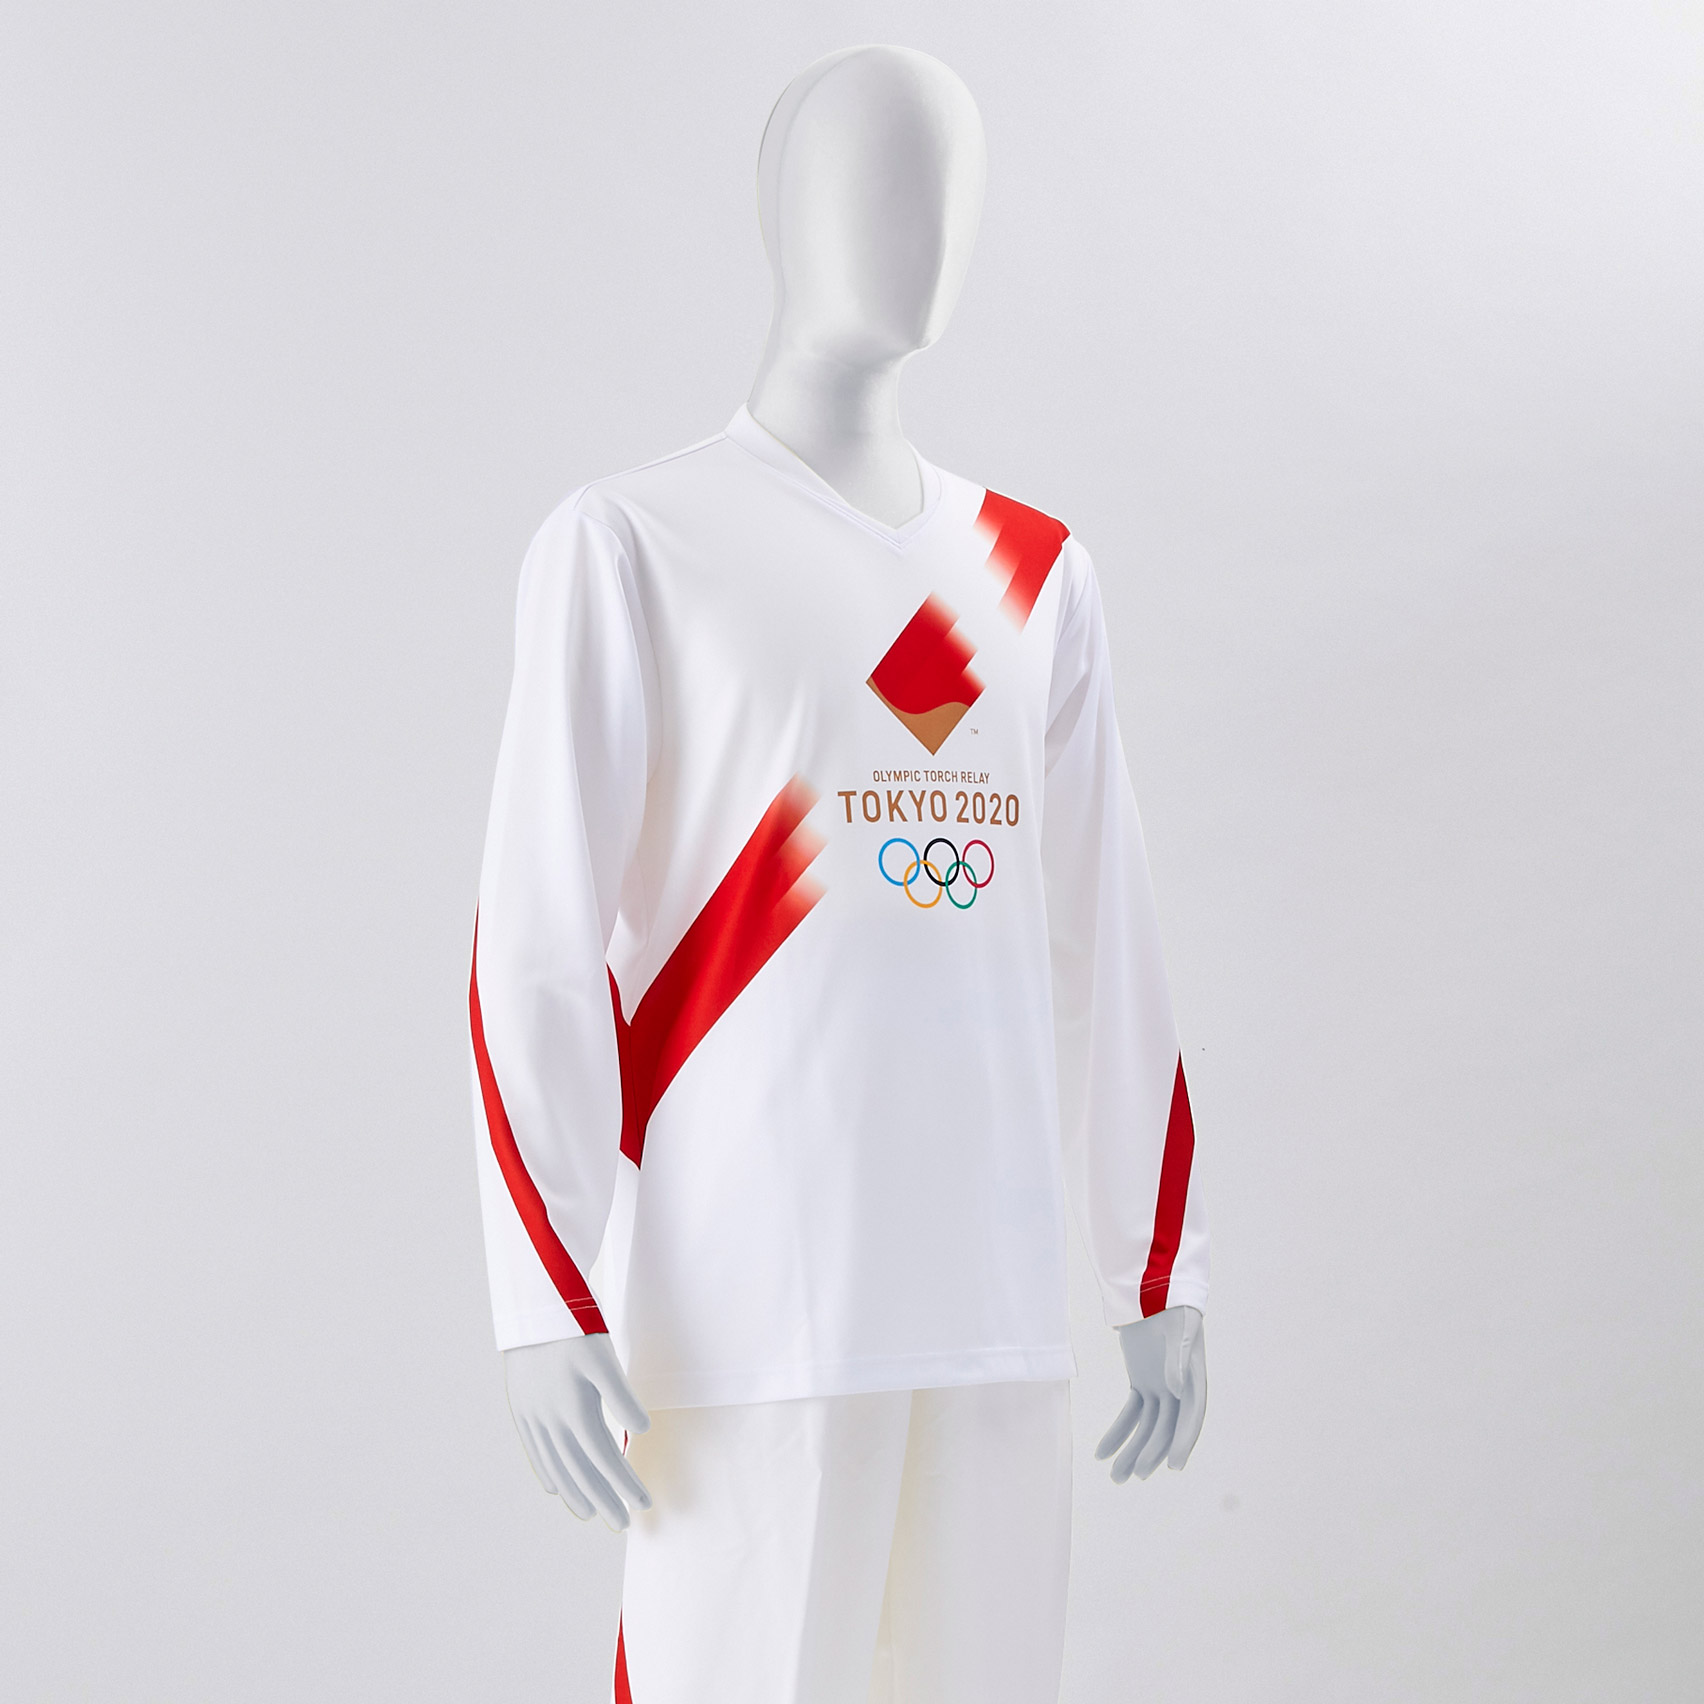 Olympic flame torchbearer T-shirts and T-shirt